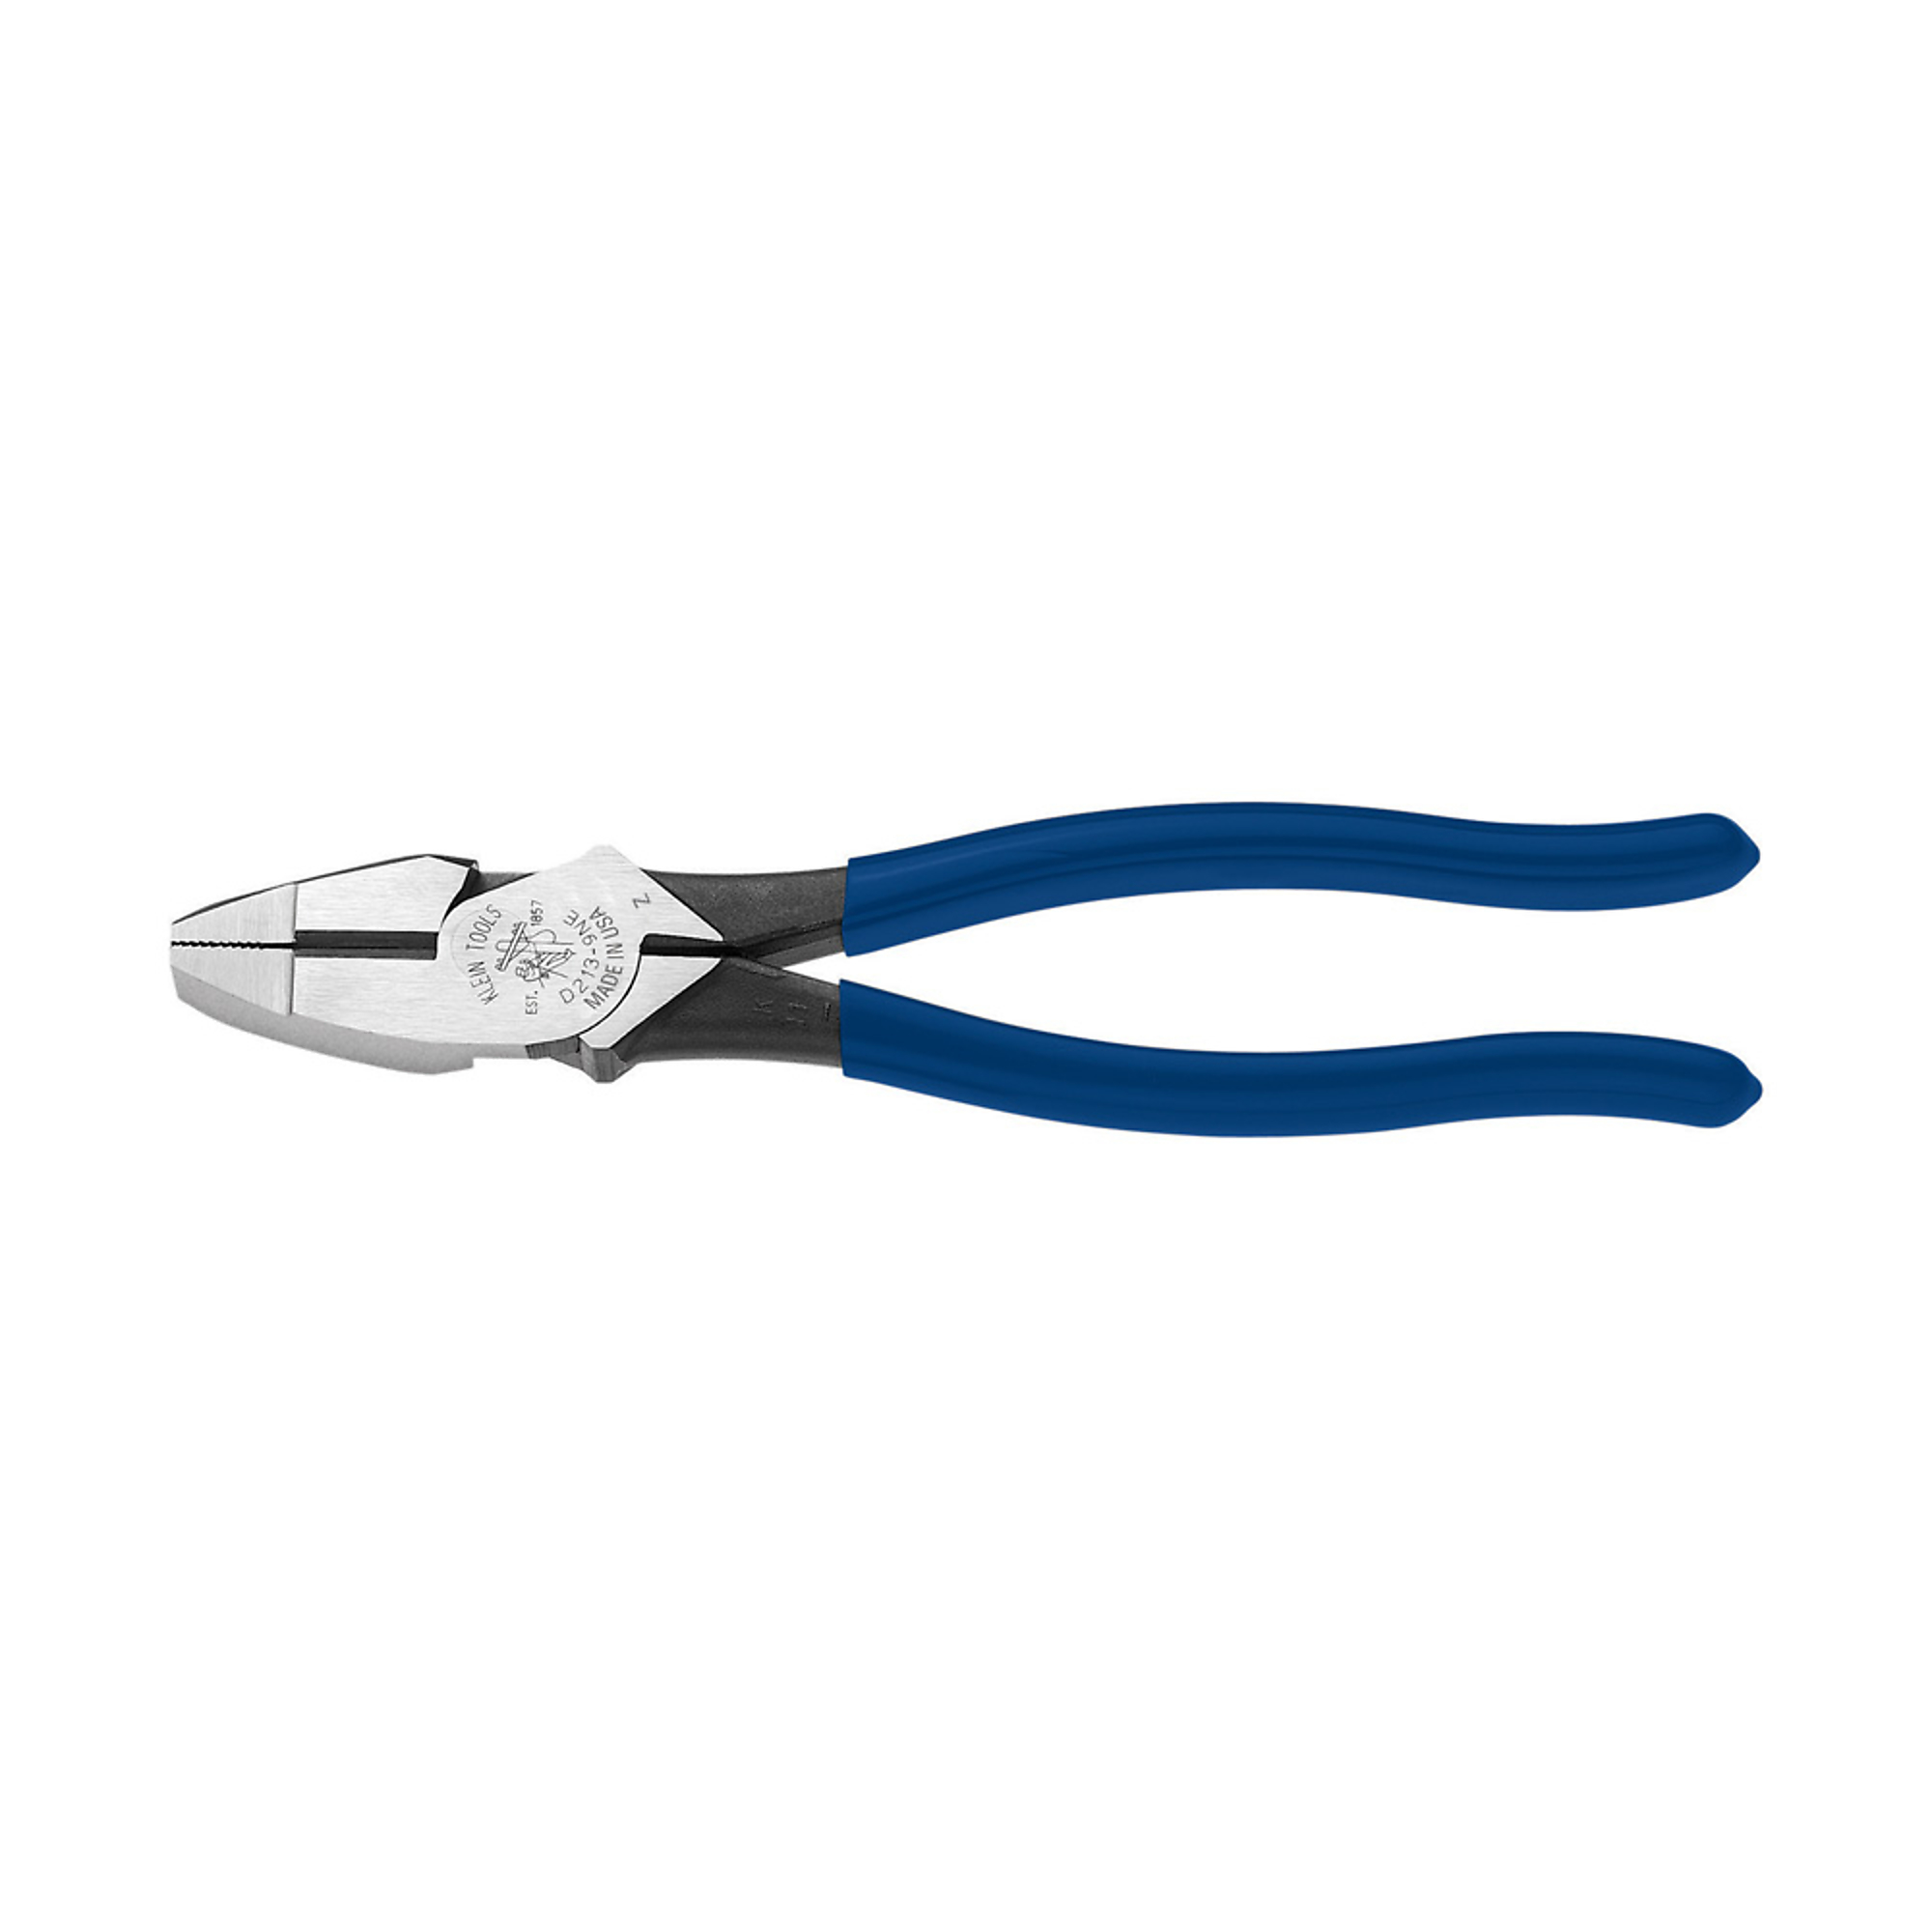 Klein Tools, Lineman's Pliers, New England Nose, 9Inch, Pieces (qty.) 1 Material Steel, Jaw Capacity 1.38 in, Model D213-9NE